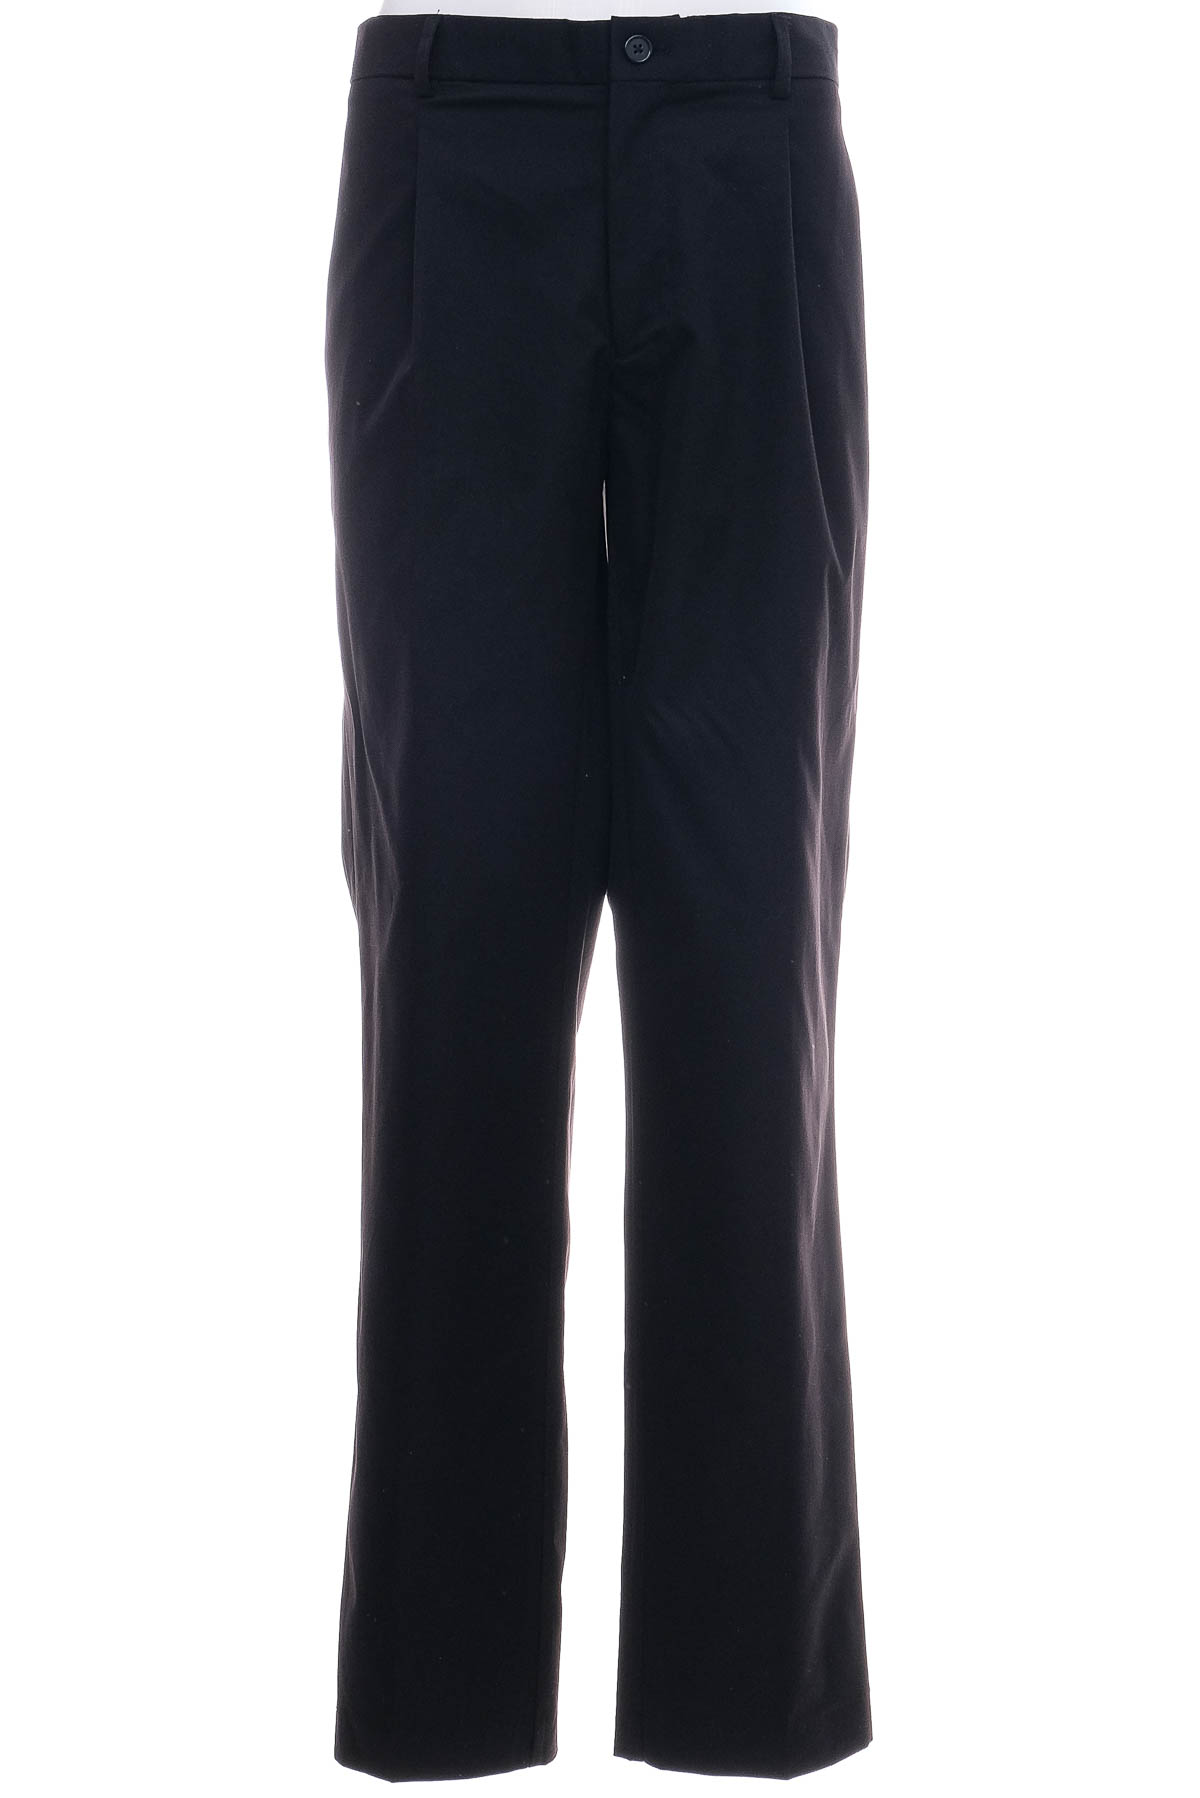 Men's trousers - PREVIEW - 0